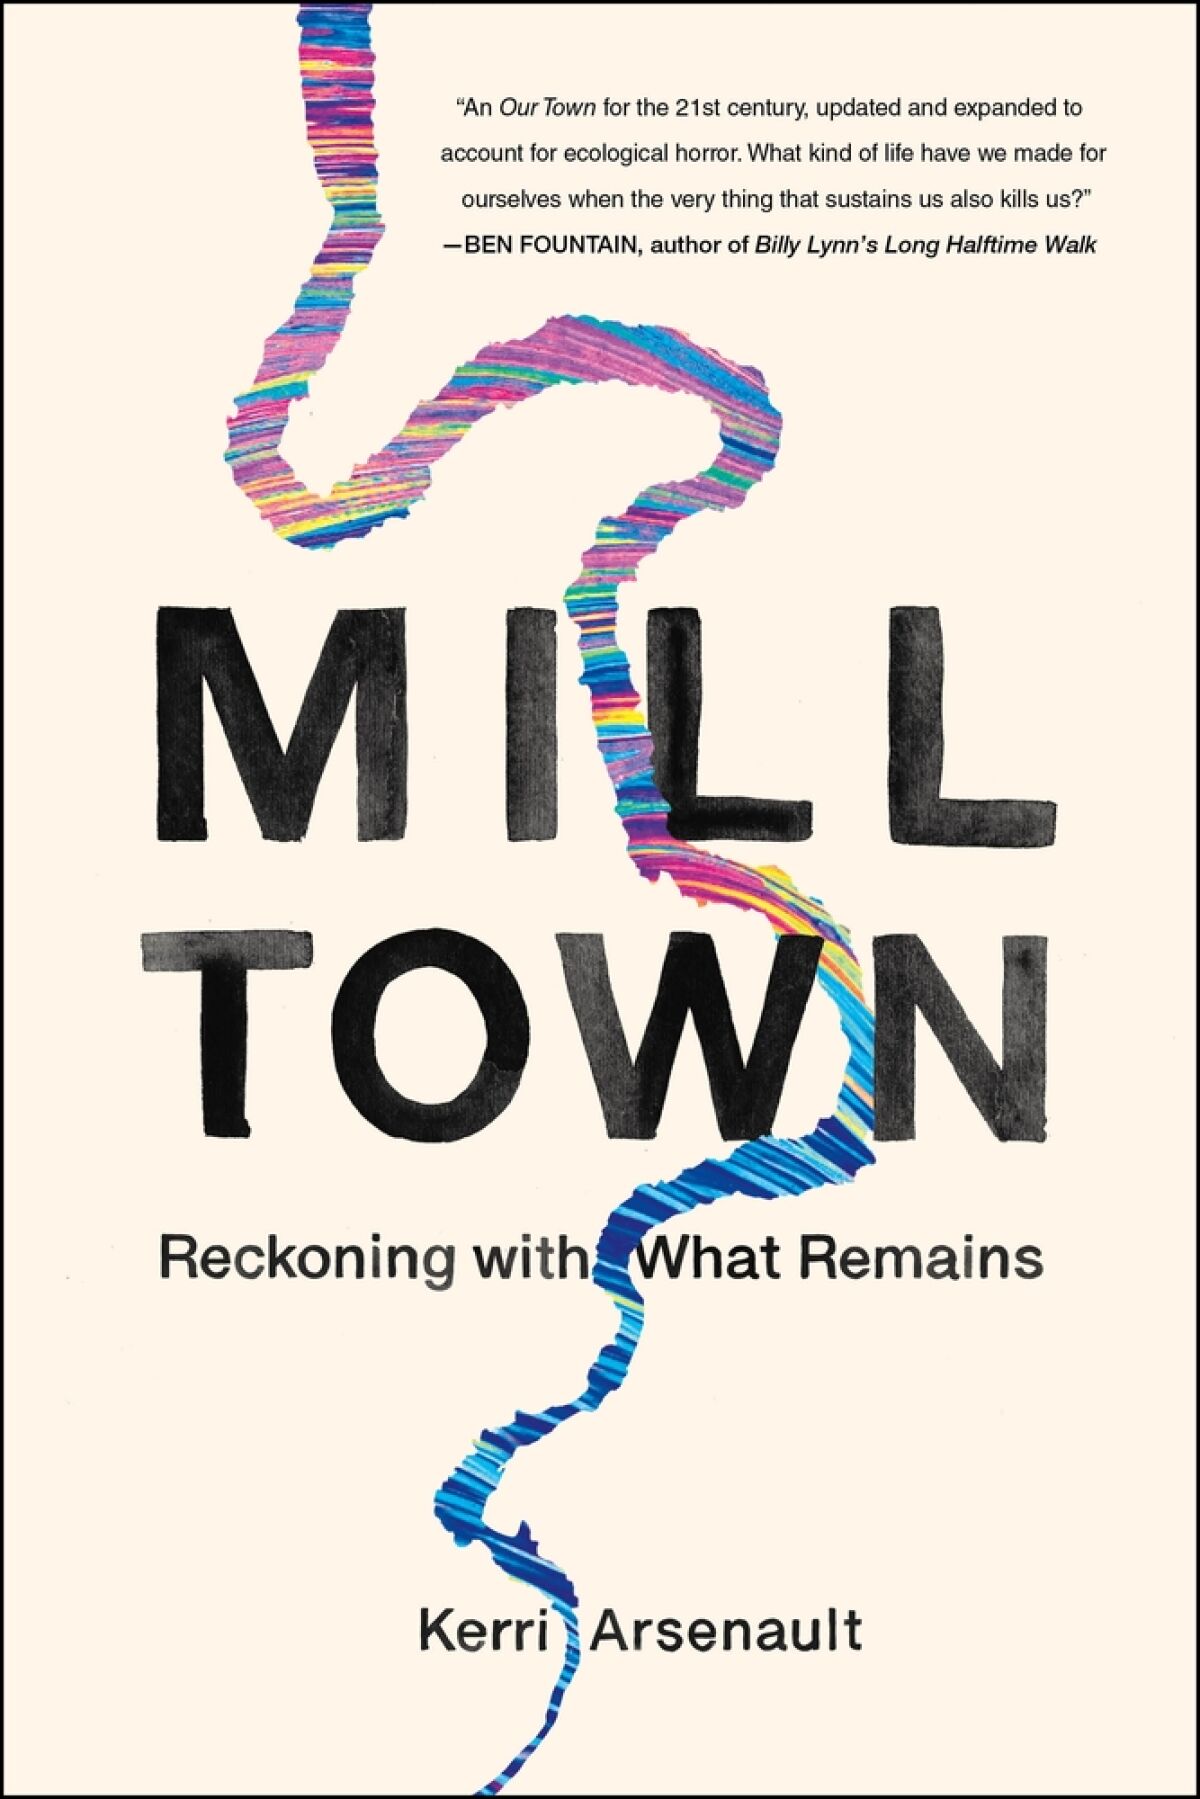 "Mill Town: Reckoning With What Remains" by Kerri Arsenault.